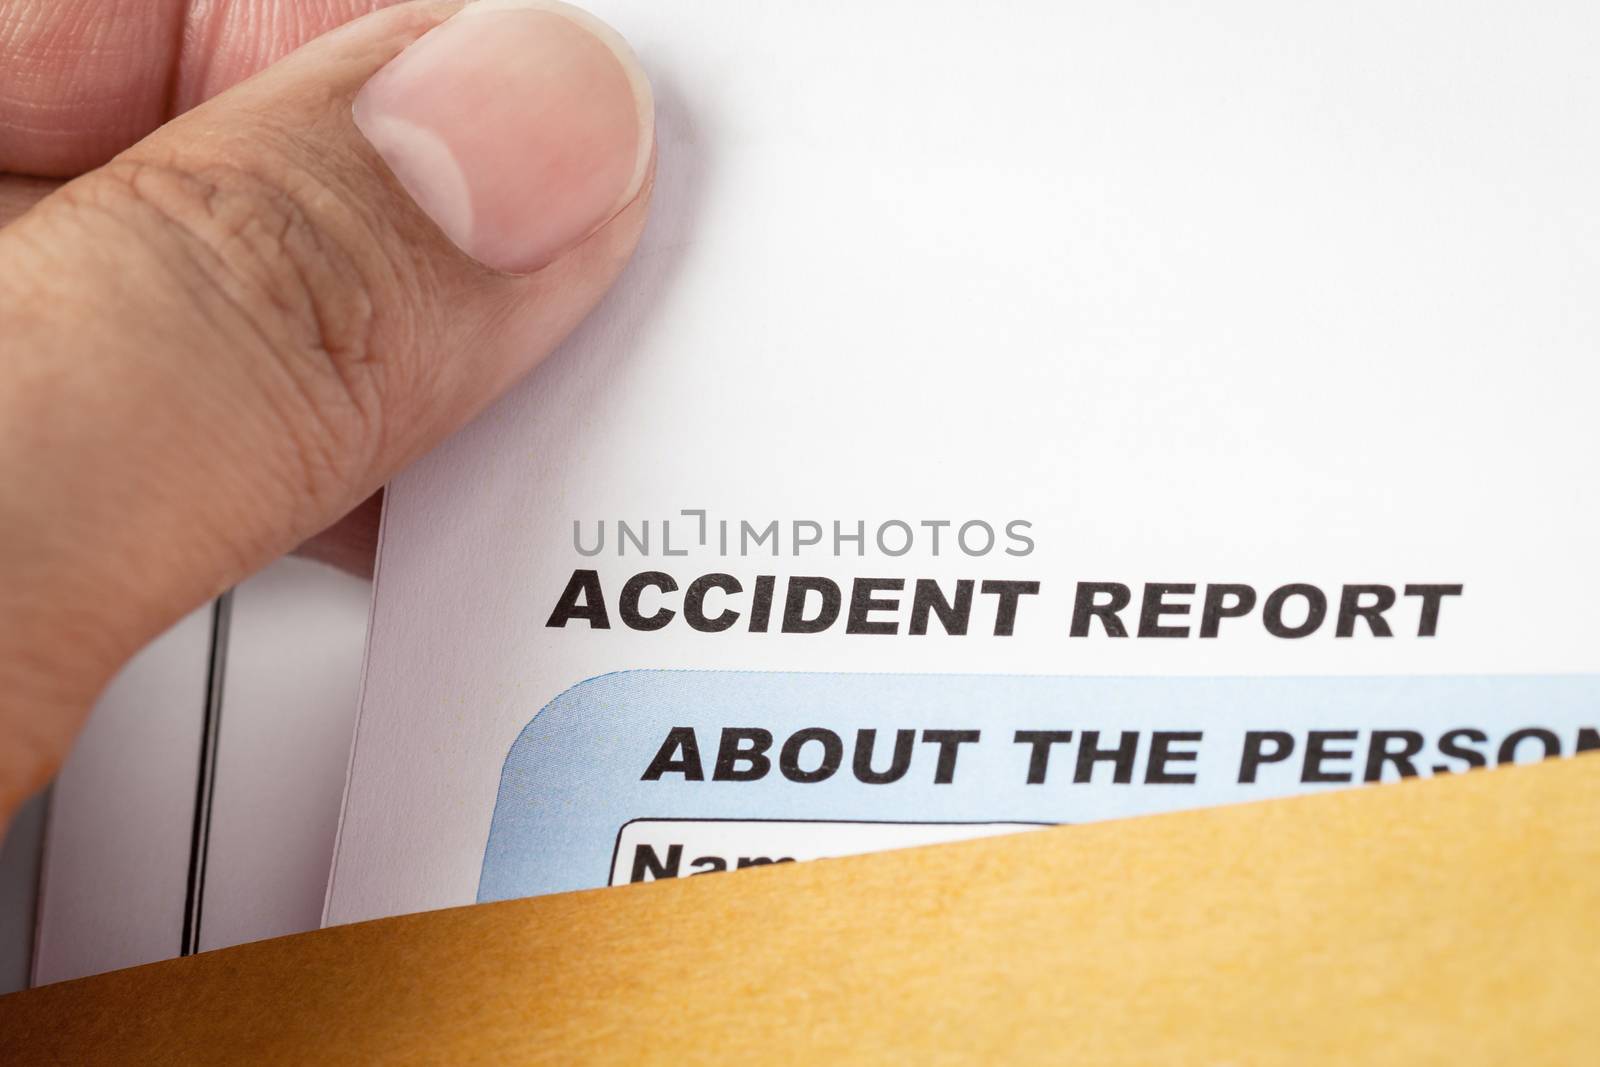 Accident report application form and pen on brown envelope and e by FrameAngel